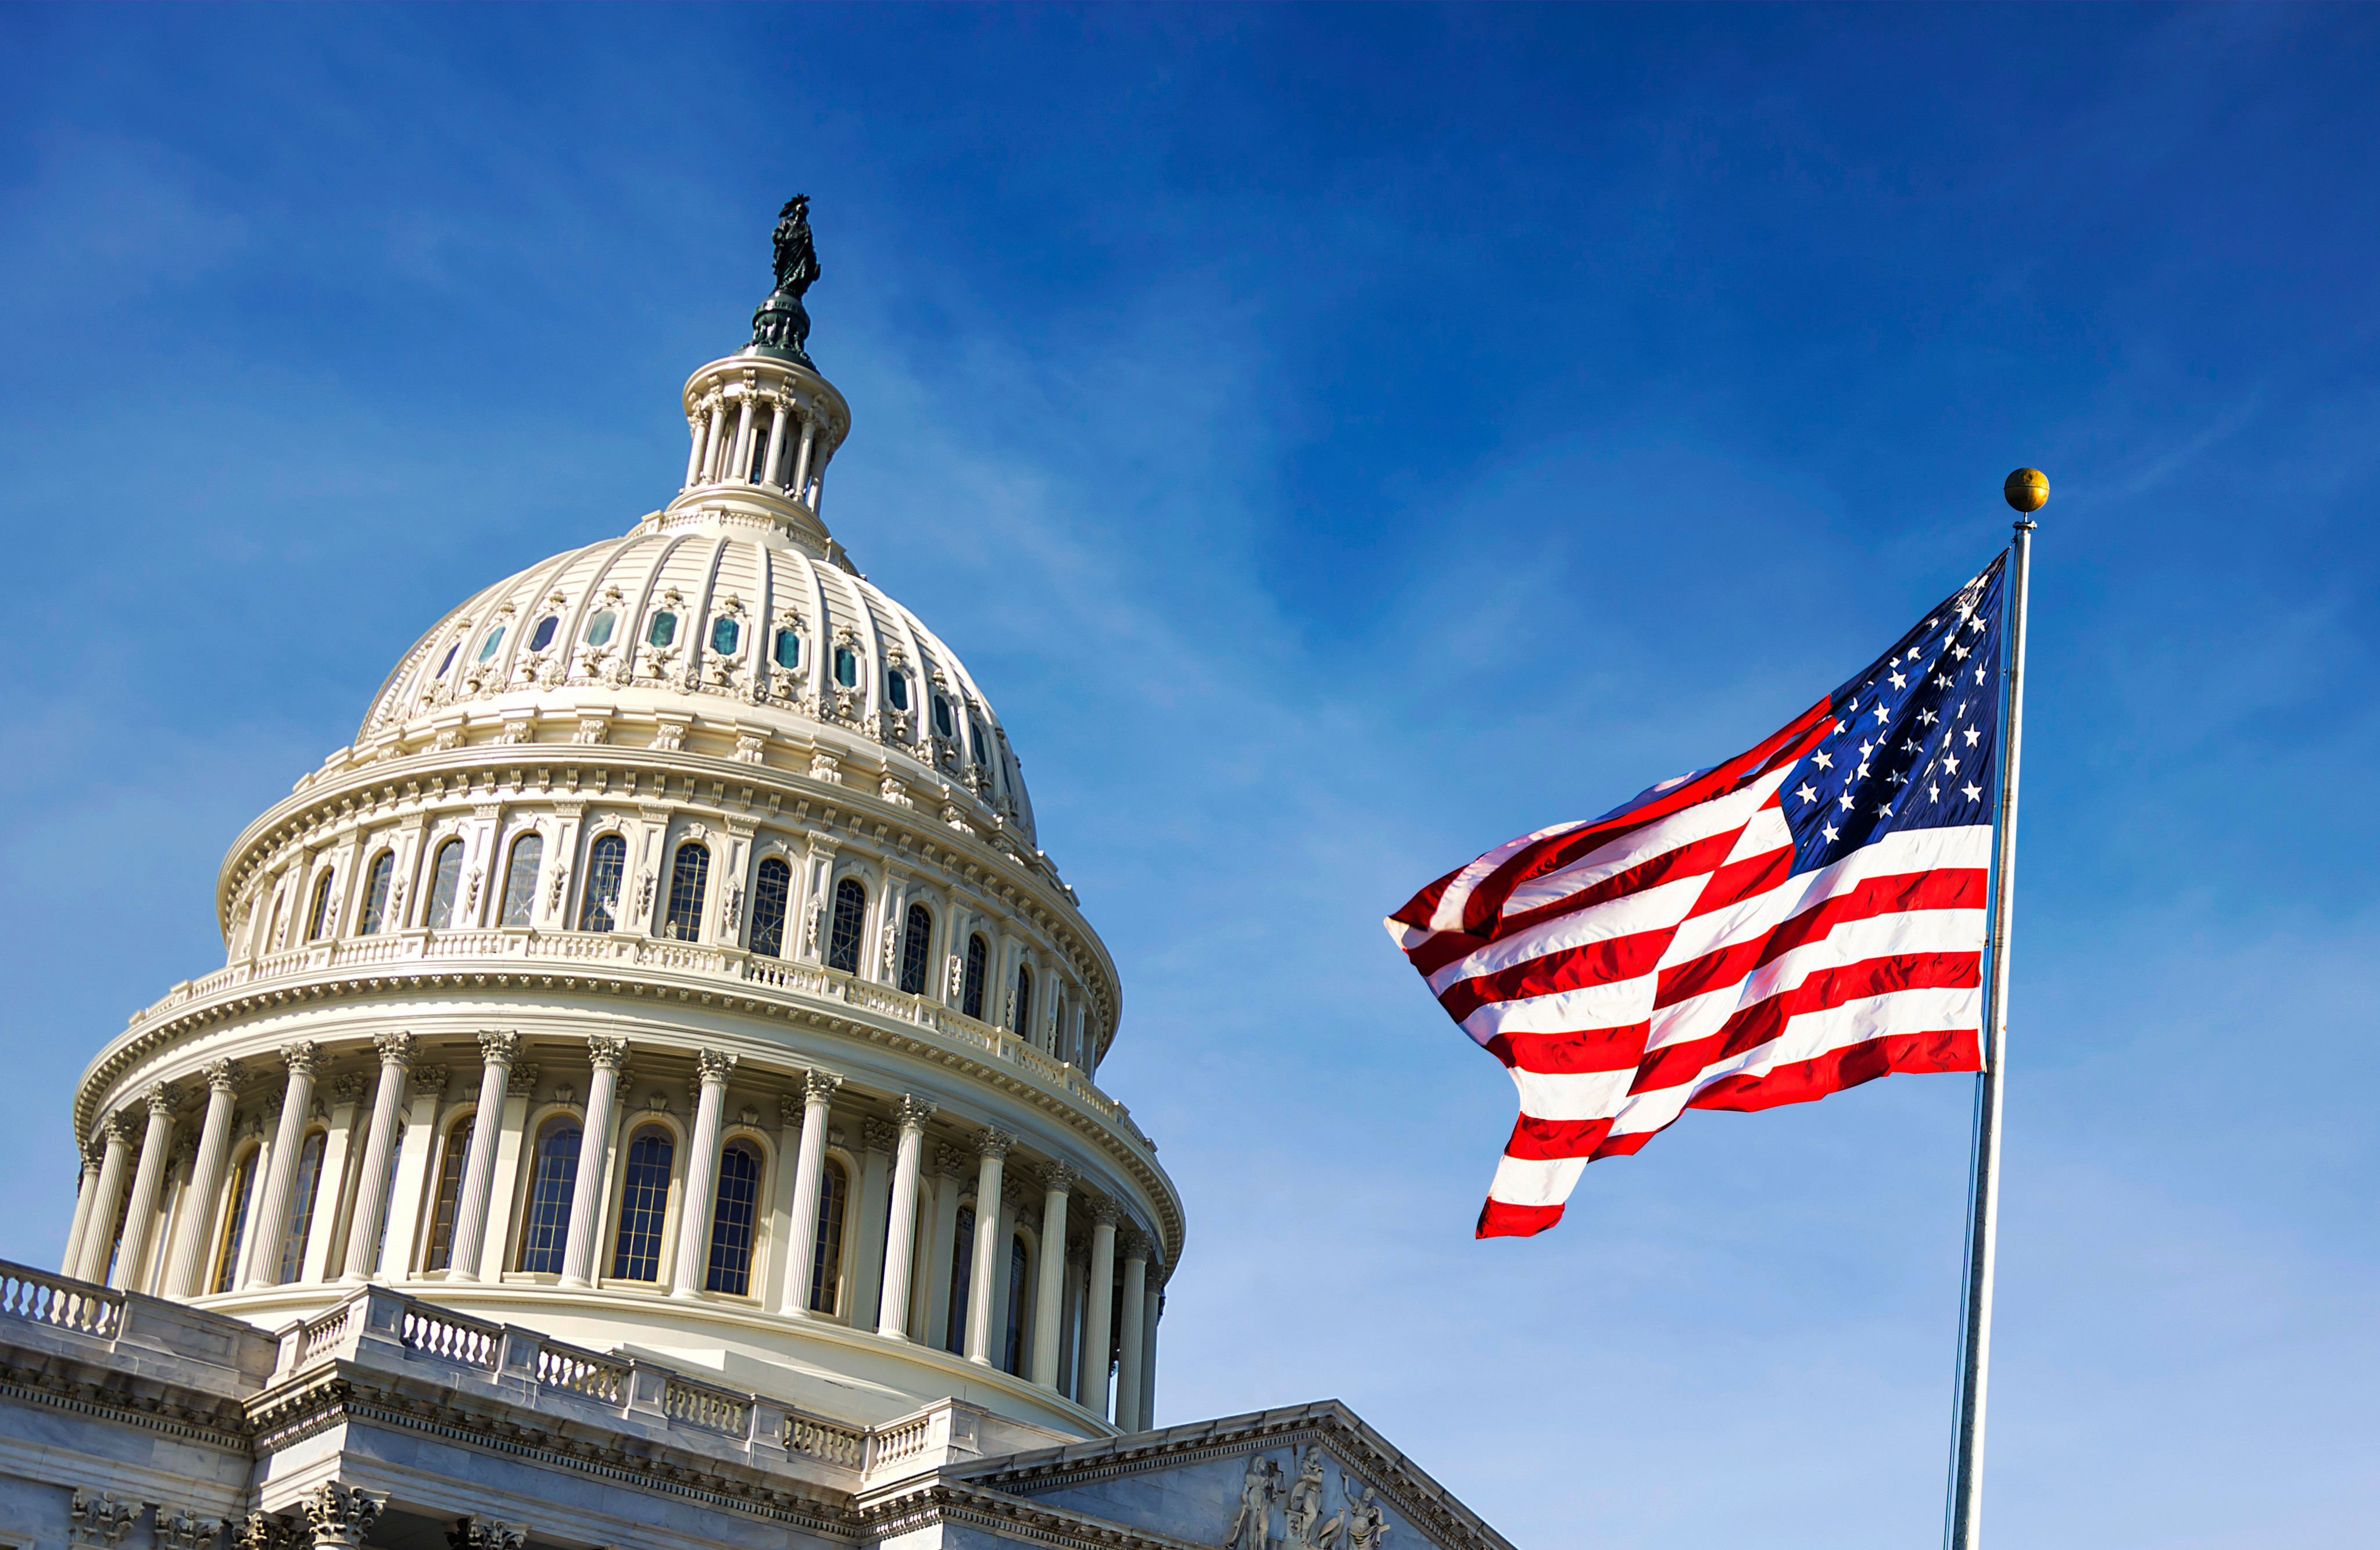 A US flag at Capitol Hill. A congressional commission made similar calls to sanction Hong Kong’s trade offices in the country last year. Photo: Shutterstock